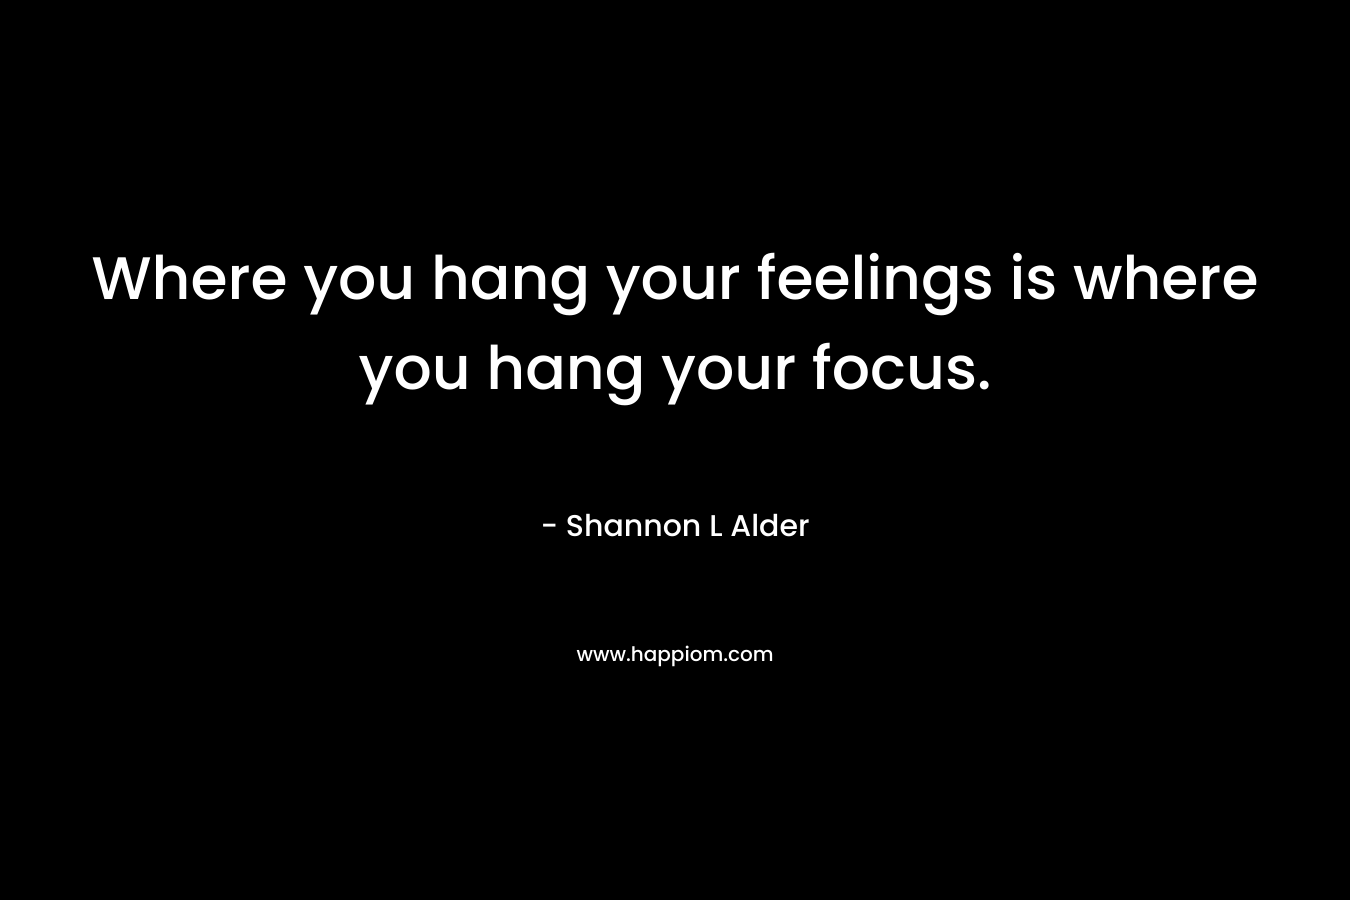 Where you hang your feelings is where you hang your focus.